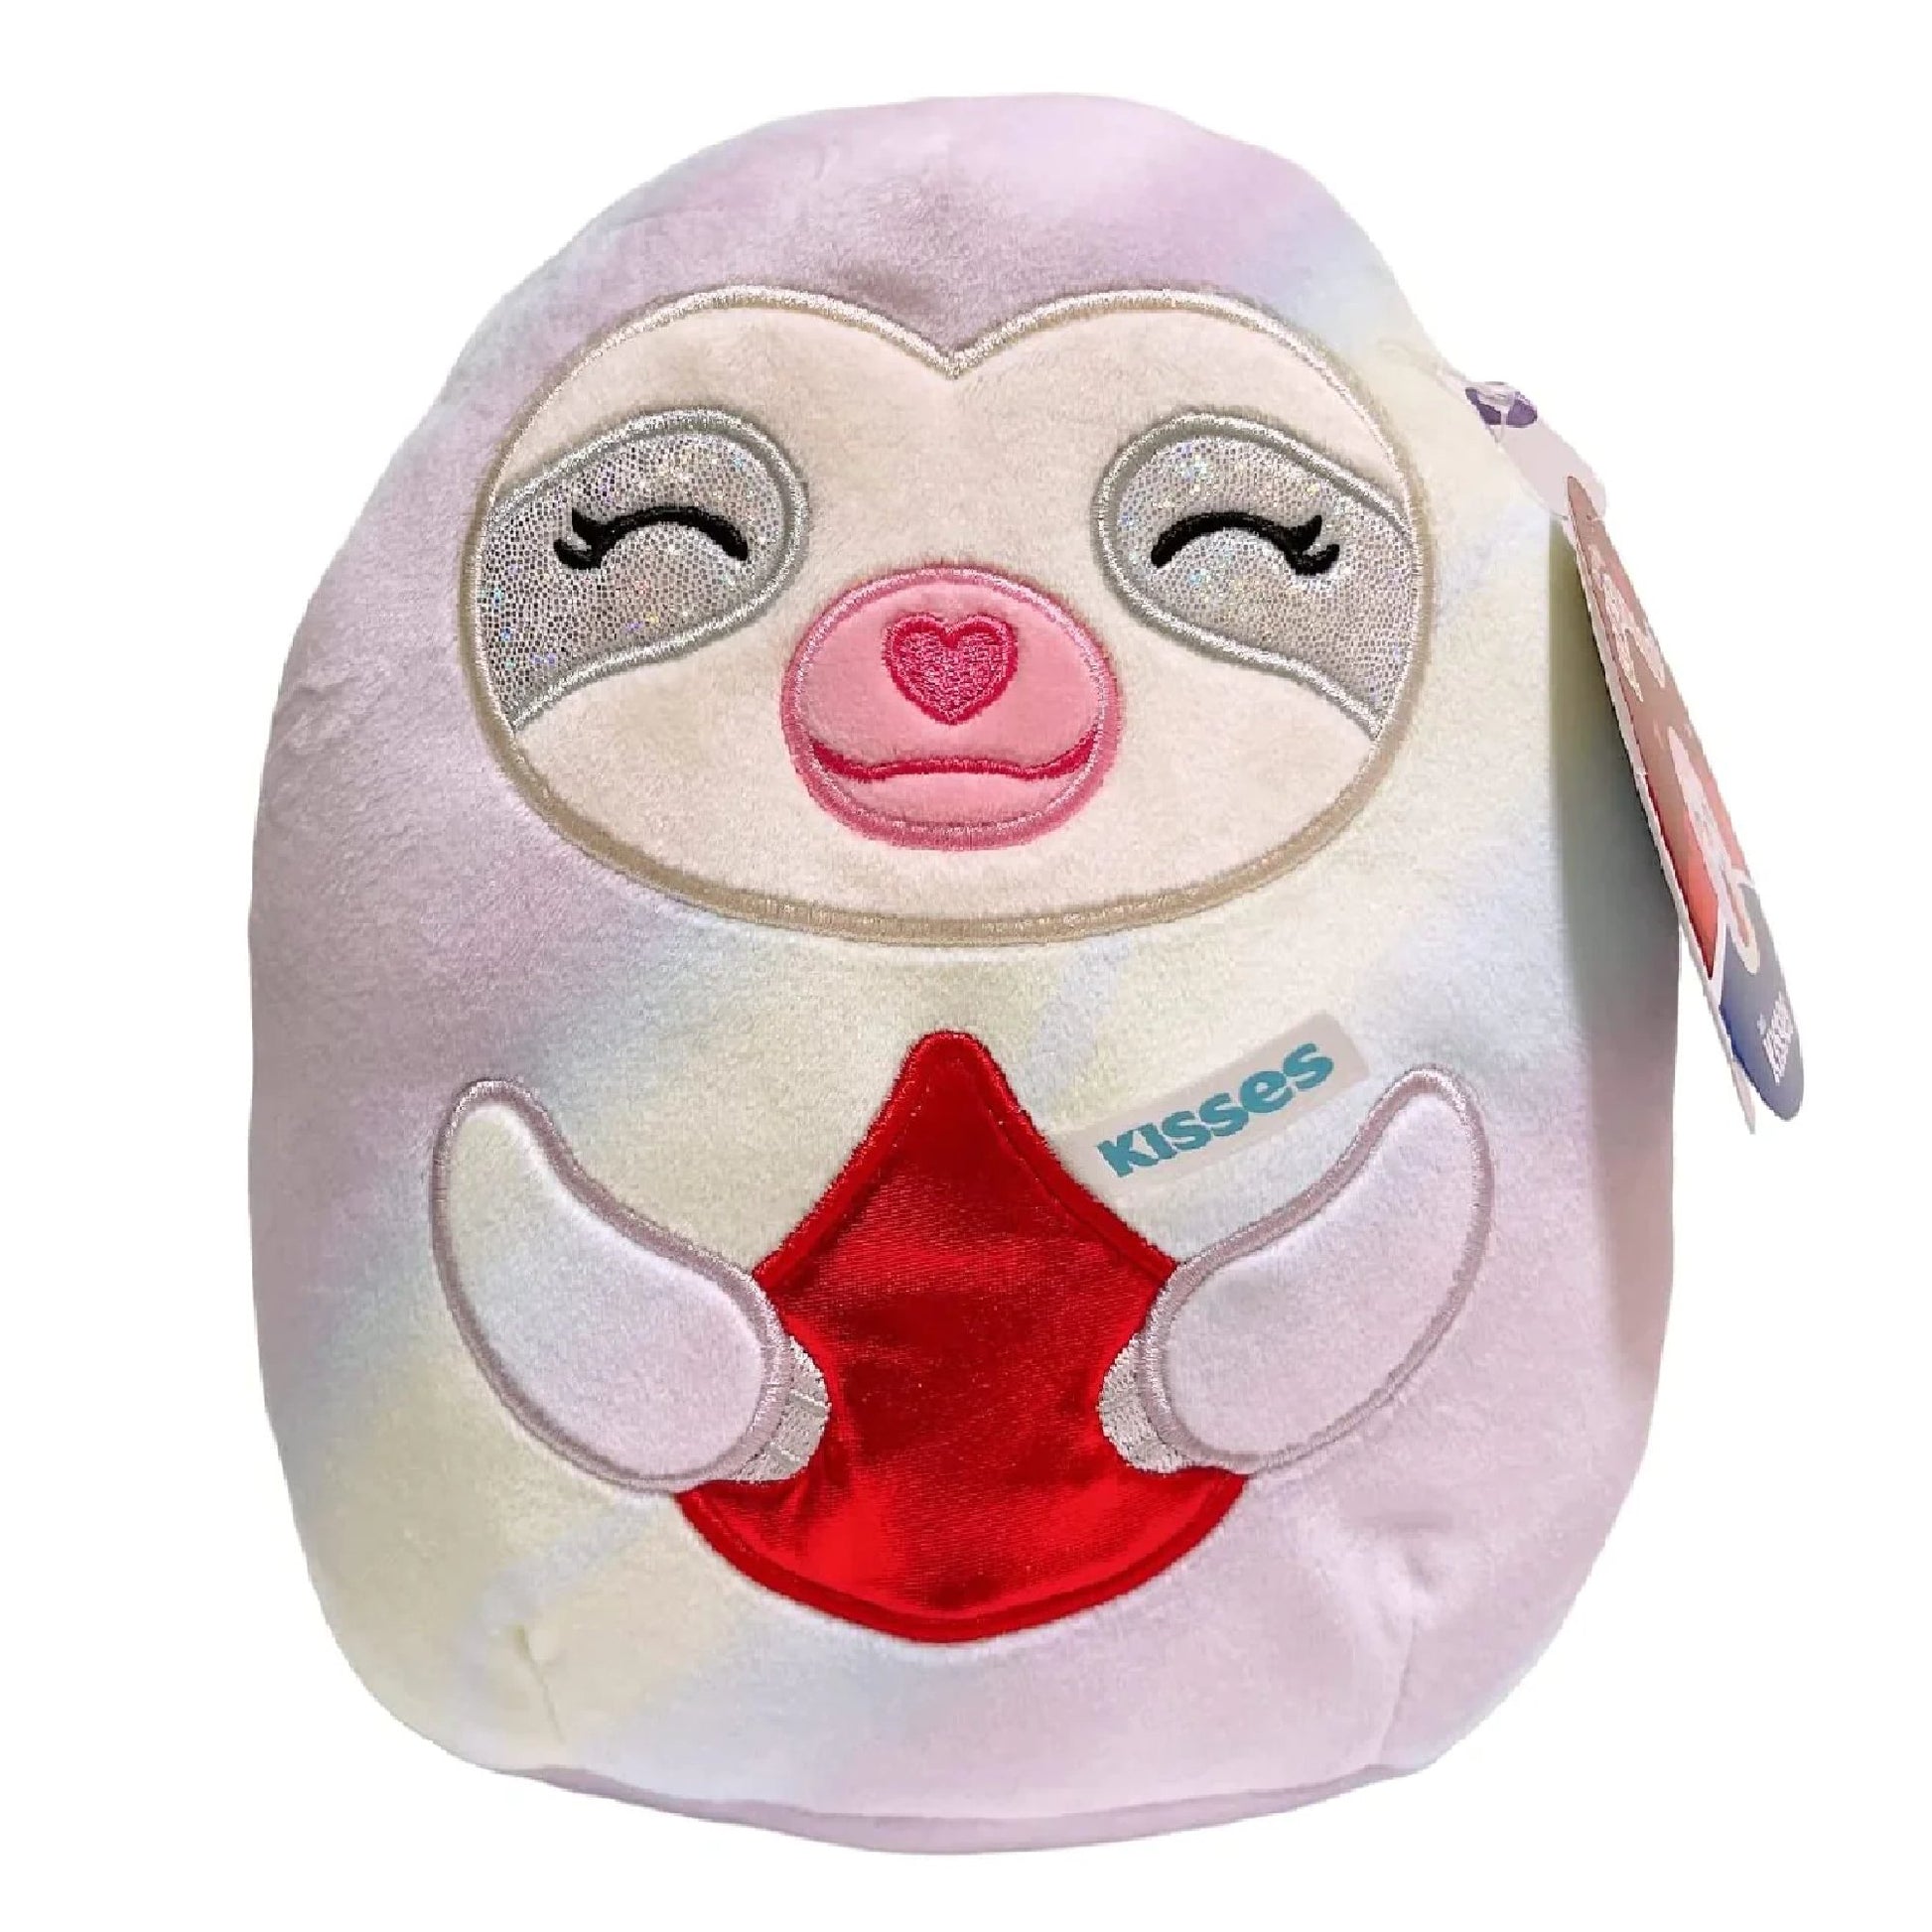 Squishmallows Hershey's Taylor The Sloth Kisses 8"